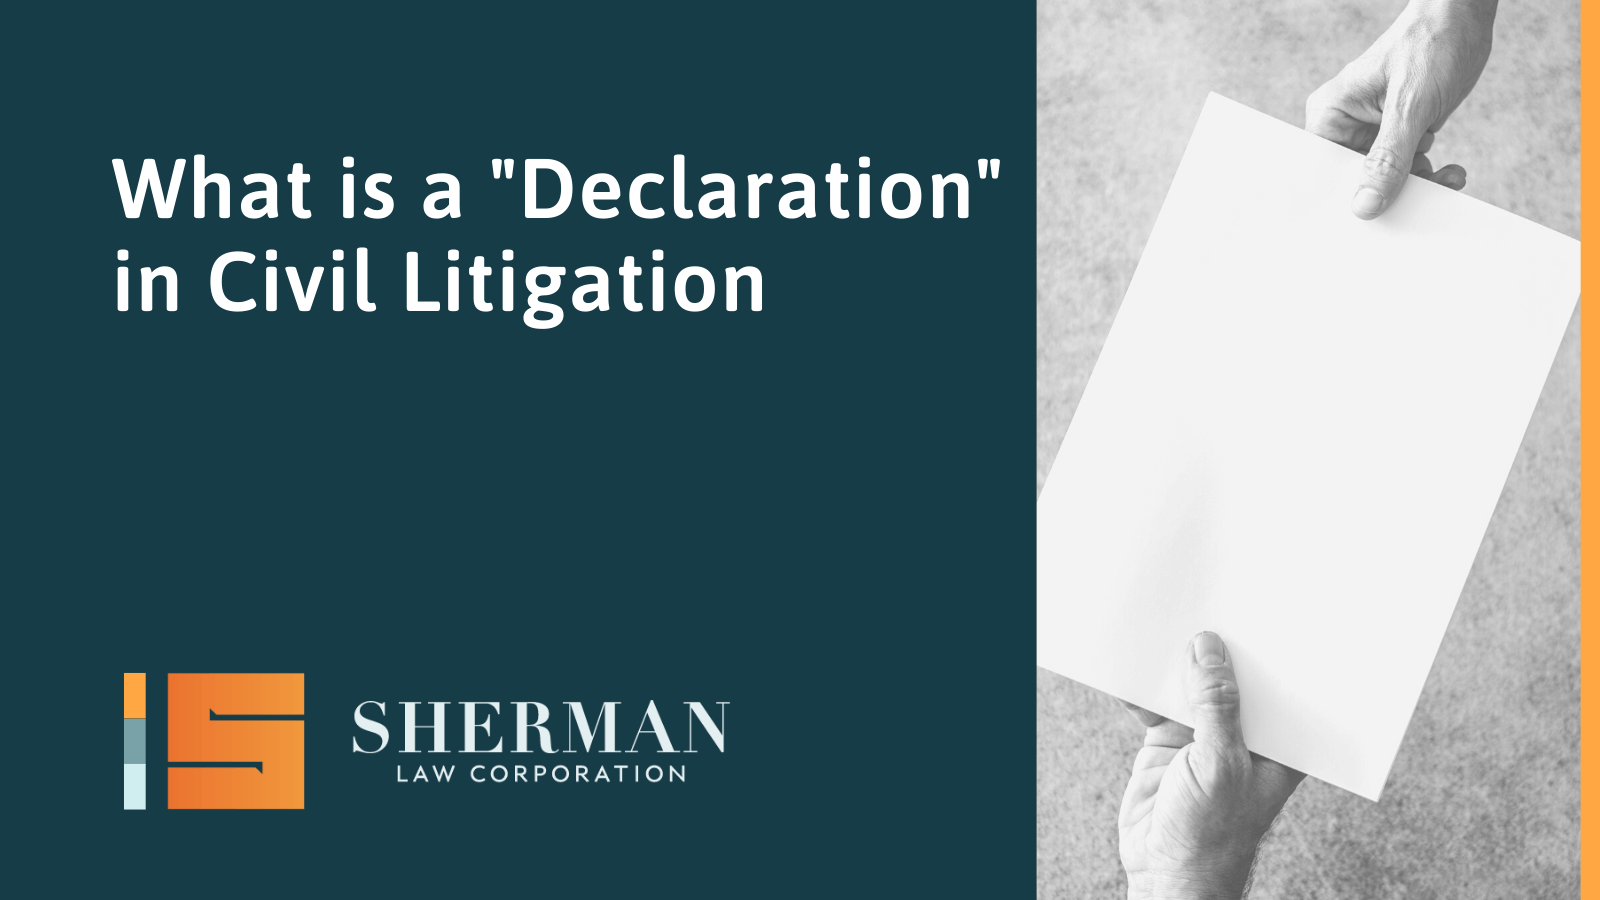 What is a "Declaration" in Civil Litigation - california employment lawyer - sherman law corporation